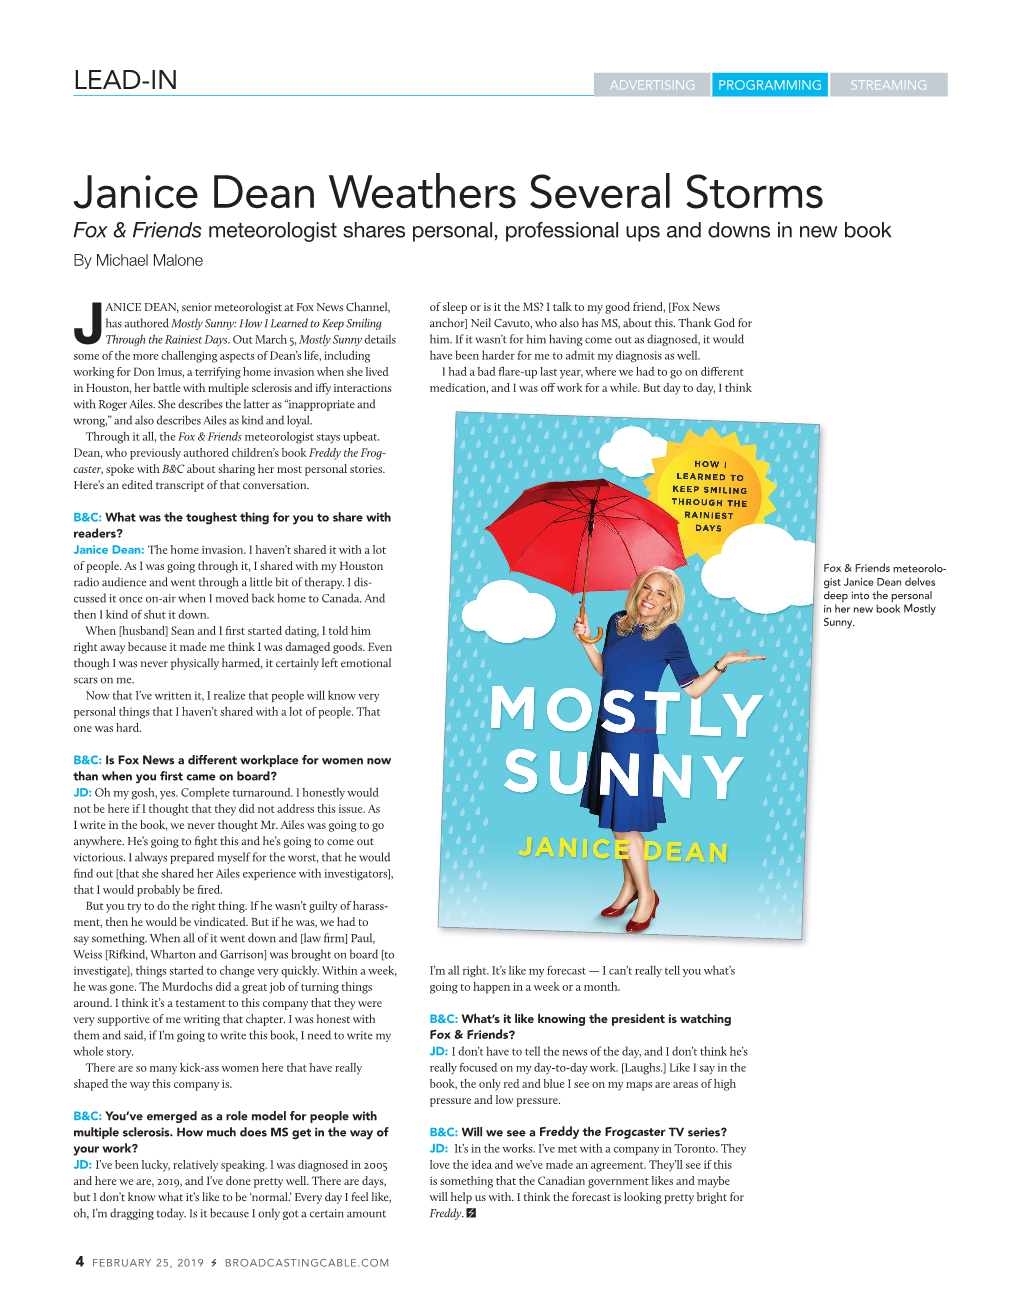 Janice Dean Weathers Several Storms Fox & Friends Meteorologist Shares Personal, Professional Ups and Downs in New Book by Michael Malone